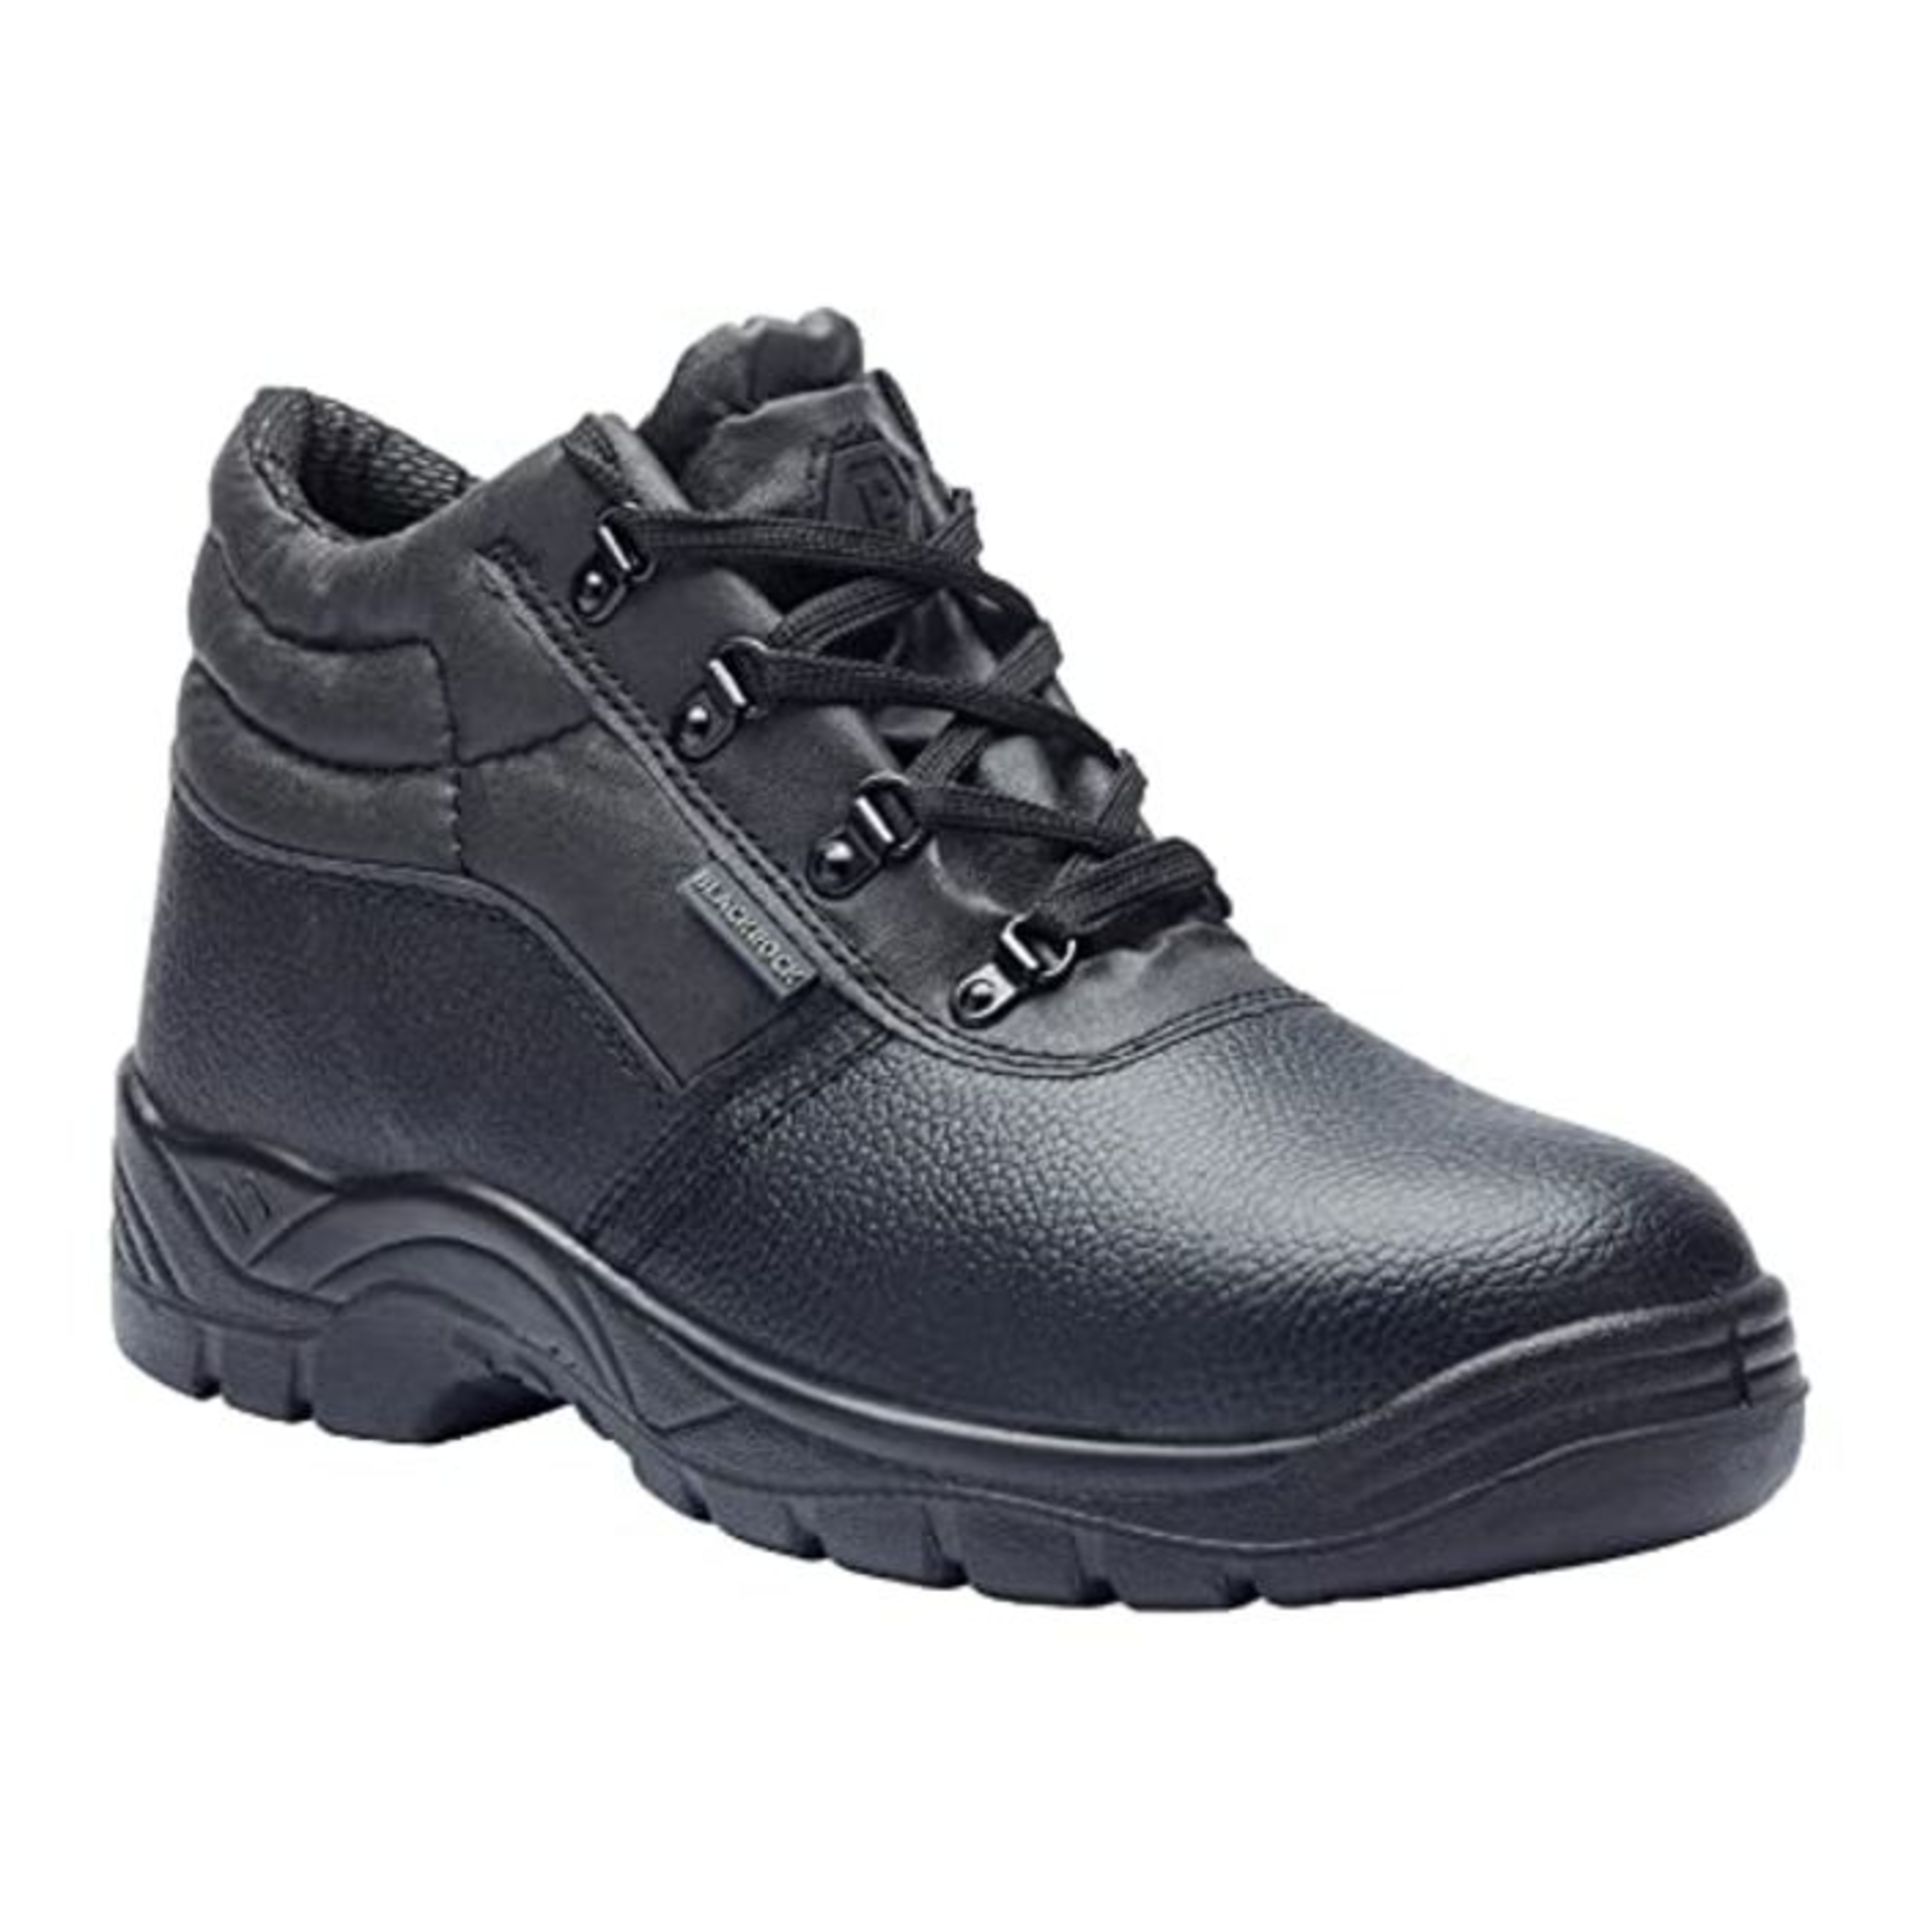 Blackrock SB-P SRC Safety Chukka Boots with Anti Static Protection, Black Leather Safe - Image 4 of 6